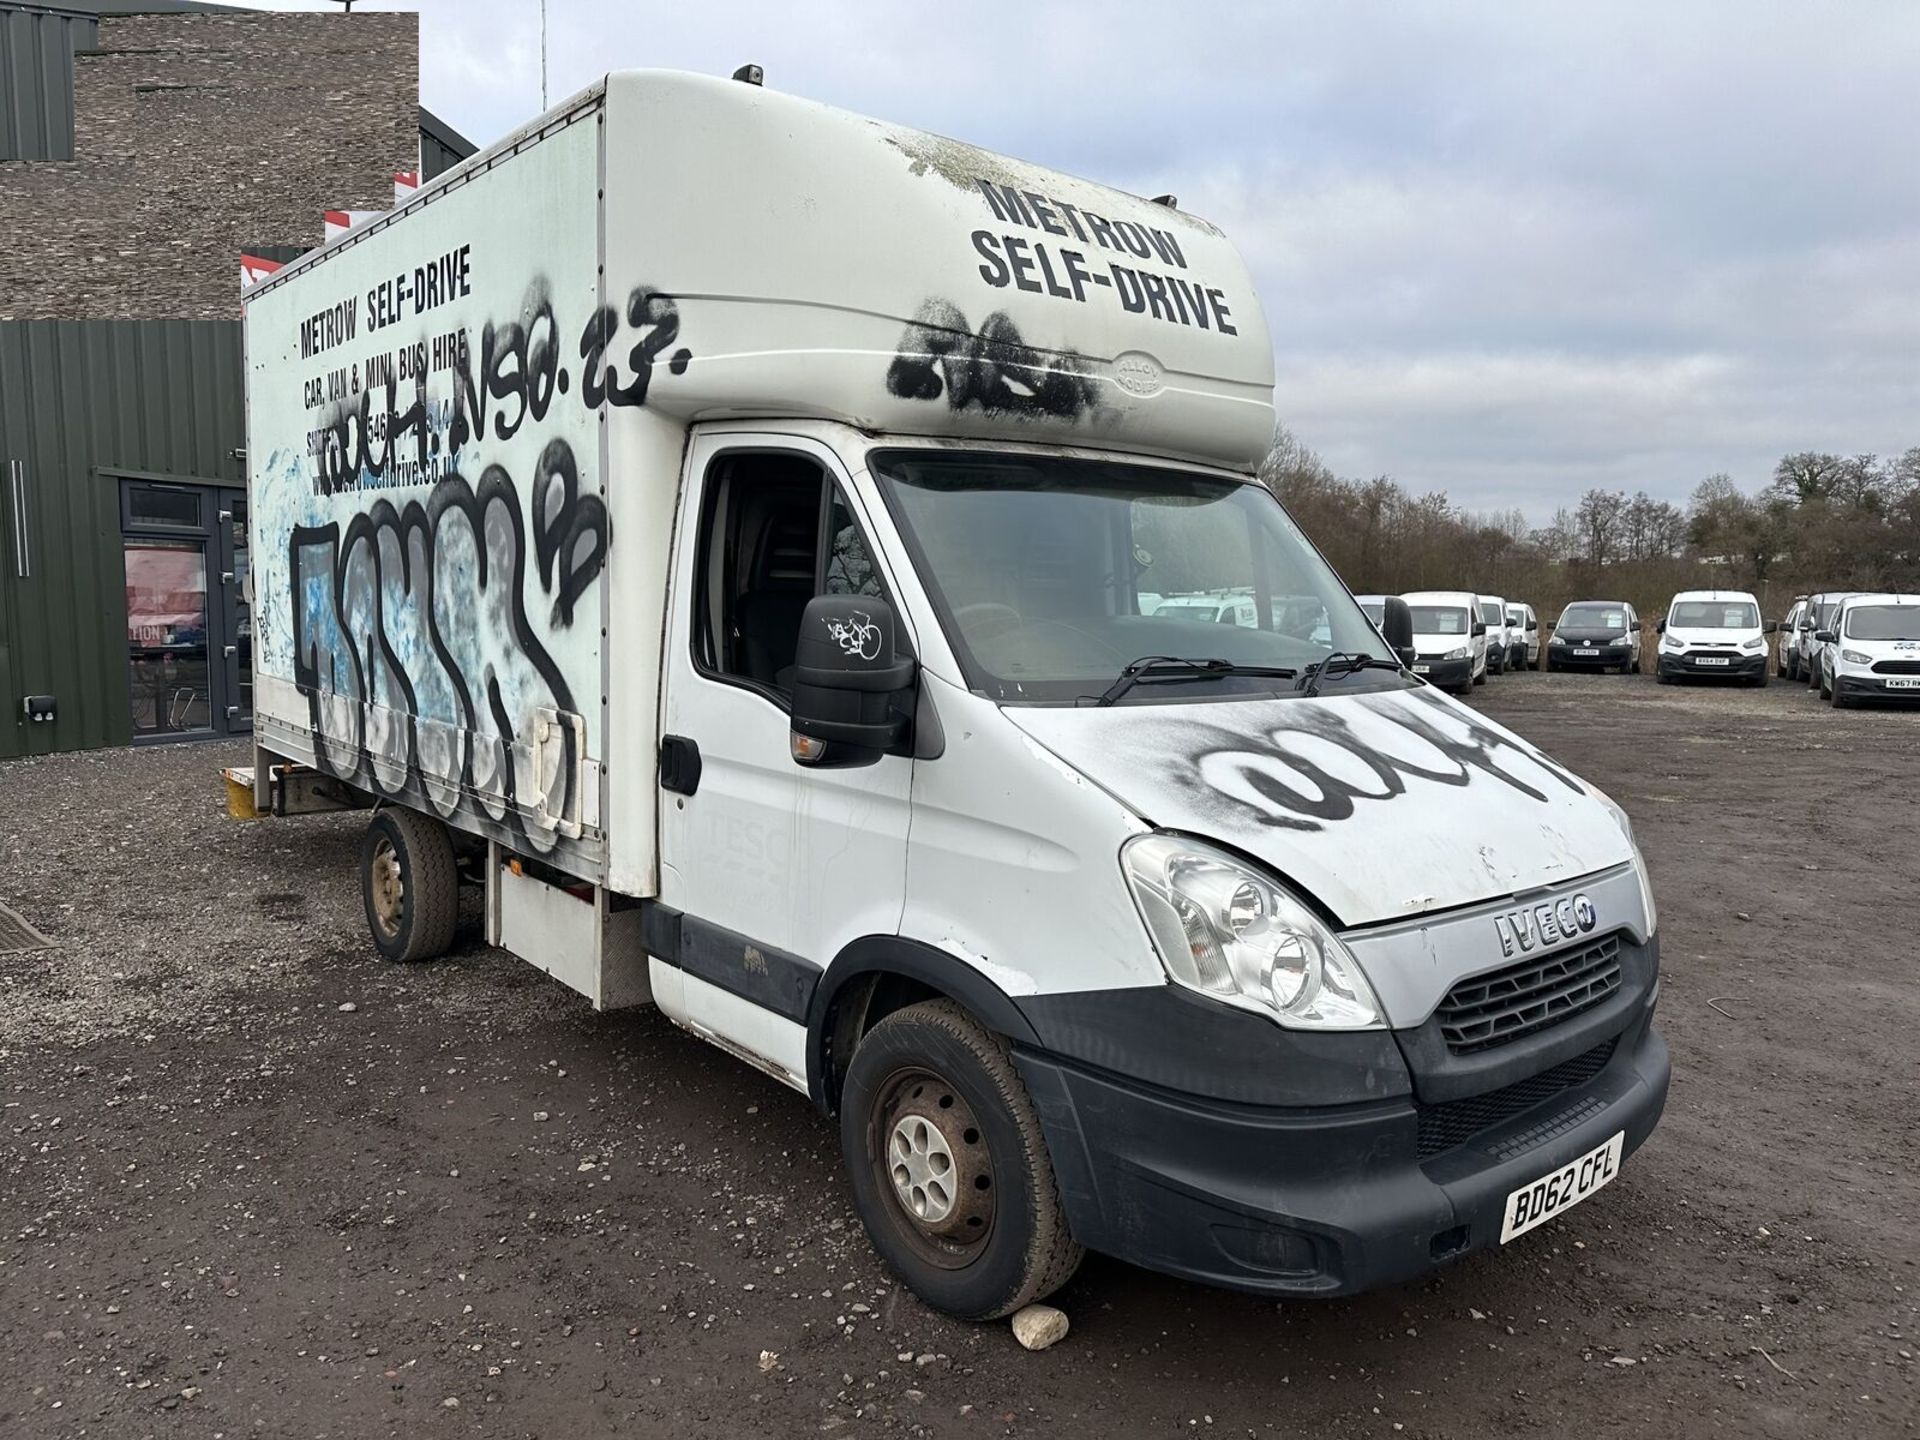 62 PLATE IVECO DAILY LUTON BOX CAMPER, SOLAR PANELS, DIESEL HEATER >>--NO VAT ON HAMMER--<<